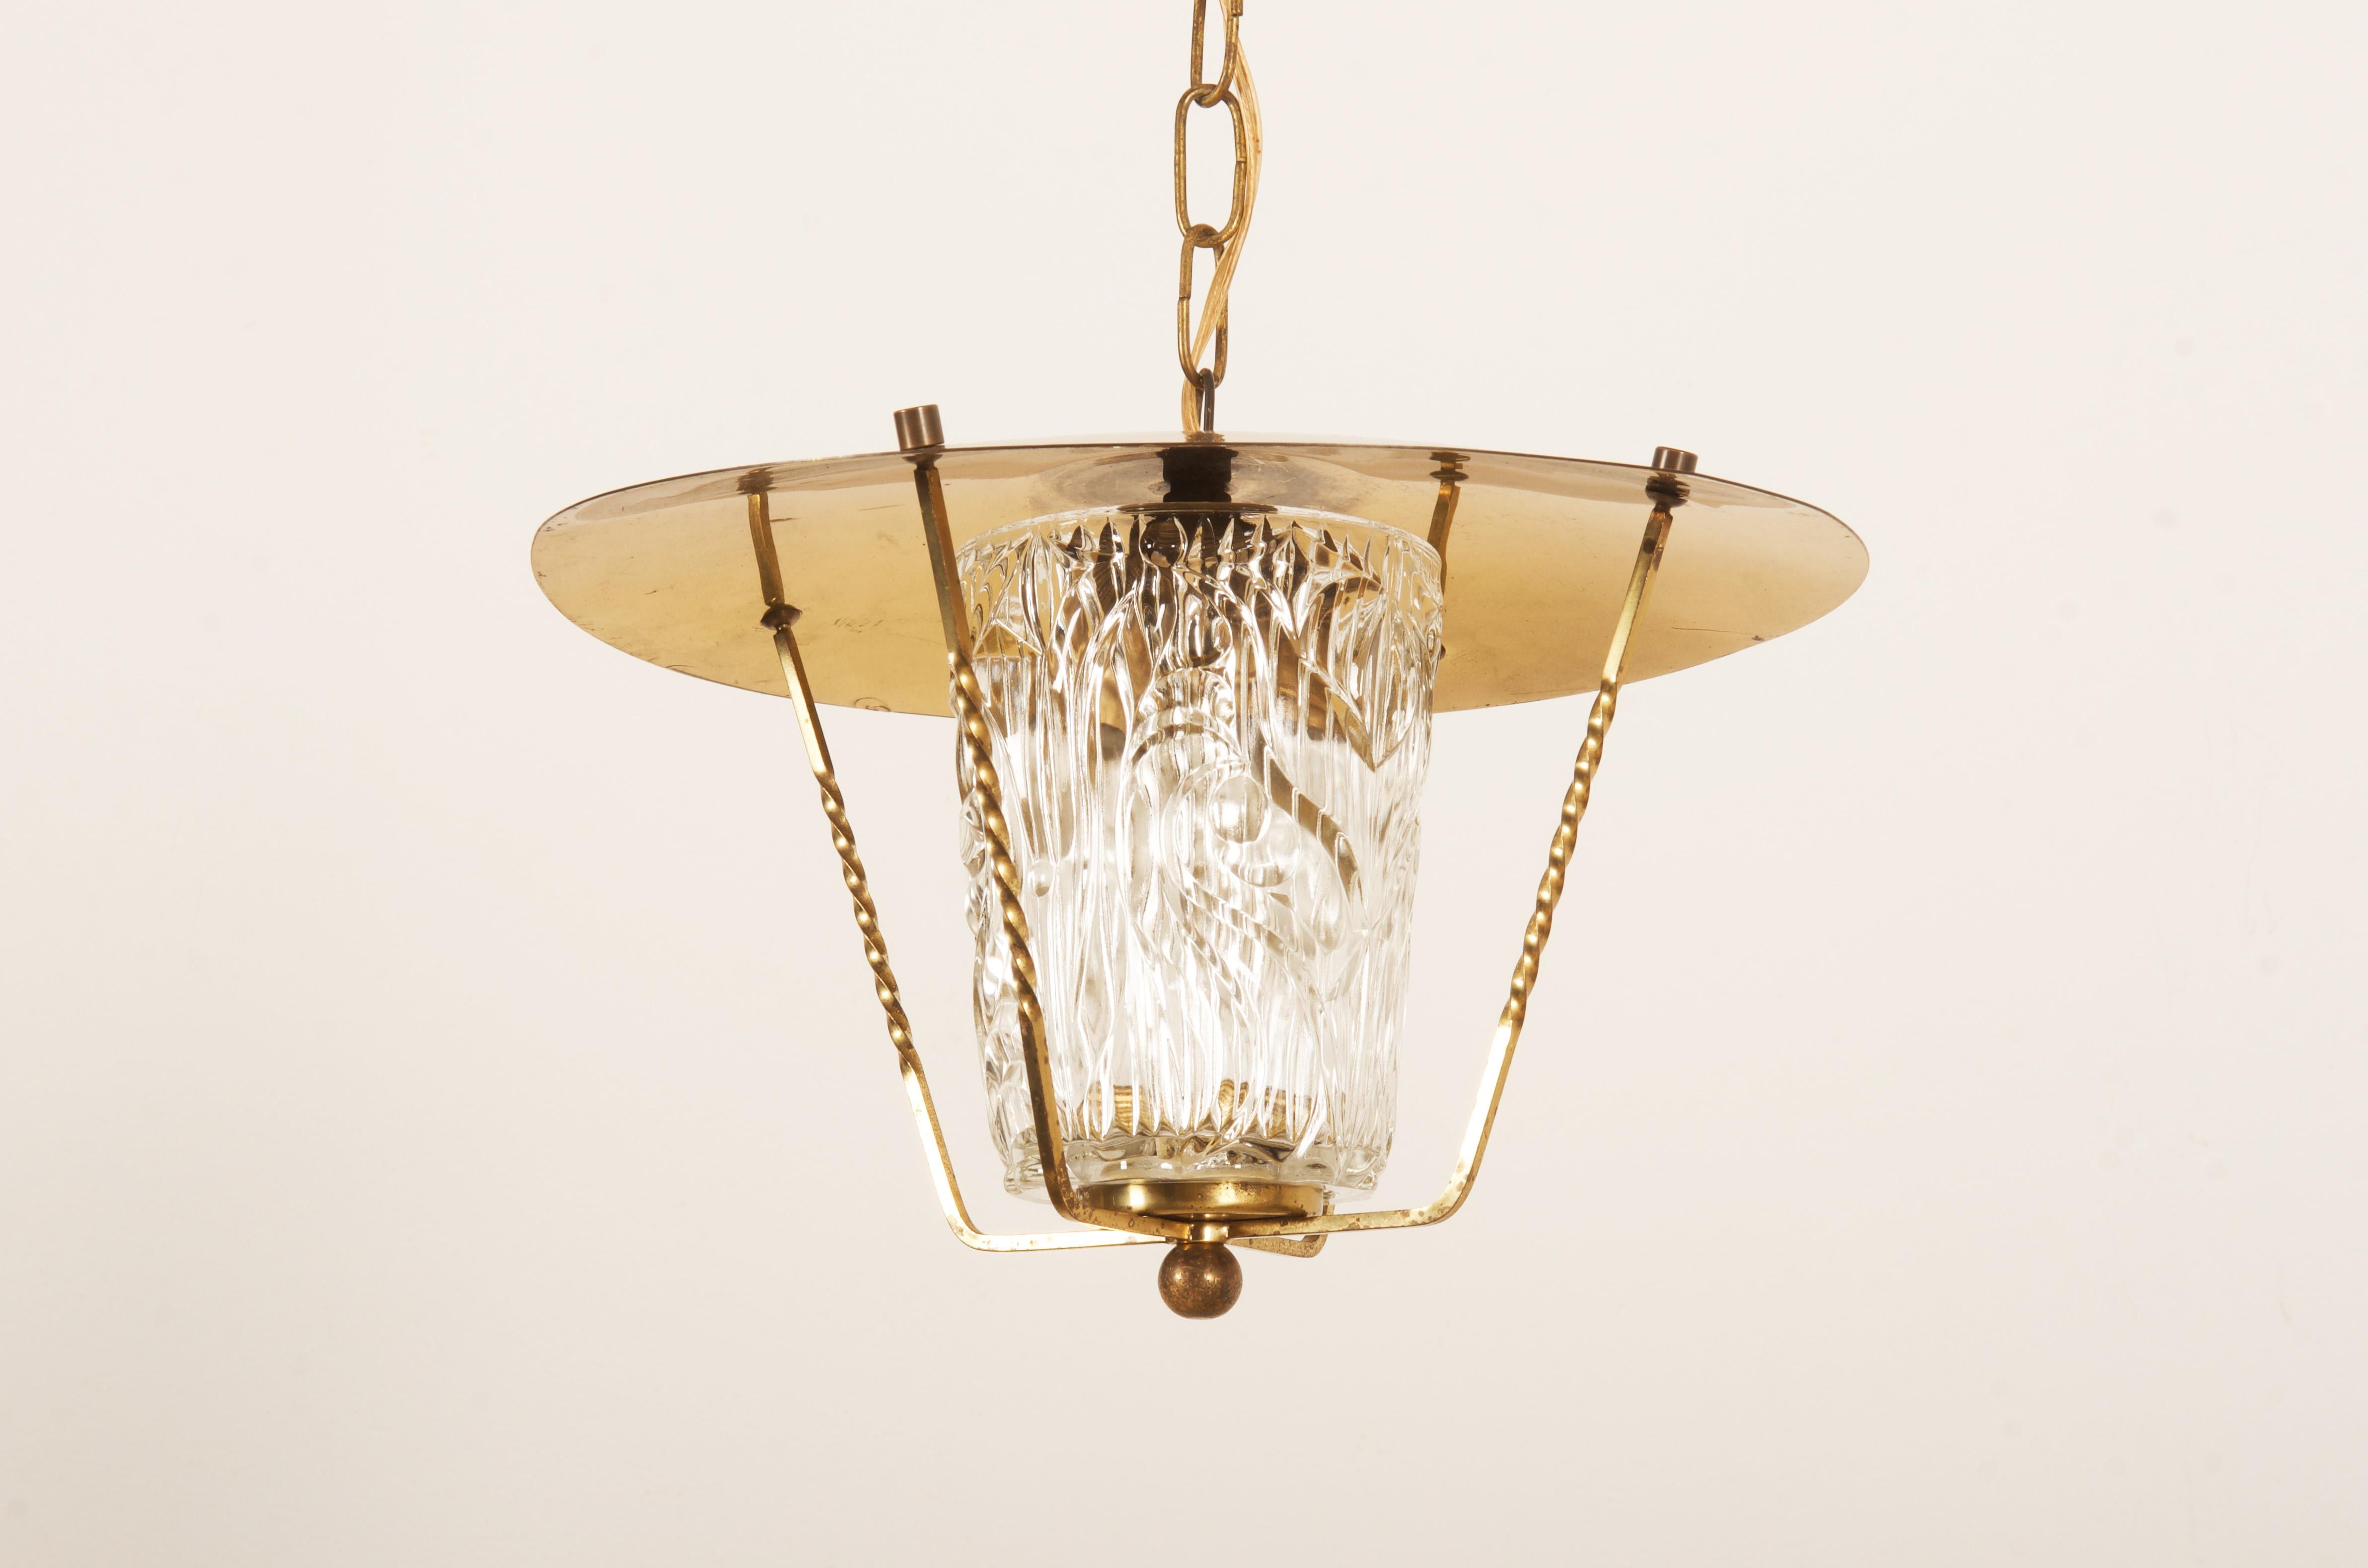 Brass frame fitted with one E27 socket and structured glass shade, made by J.T. Kalmar in the early 1950s.